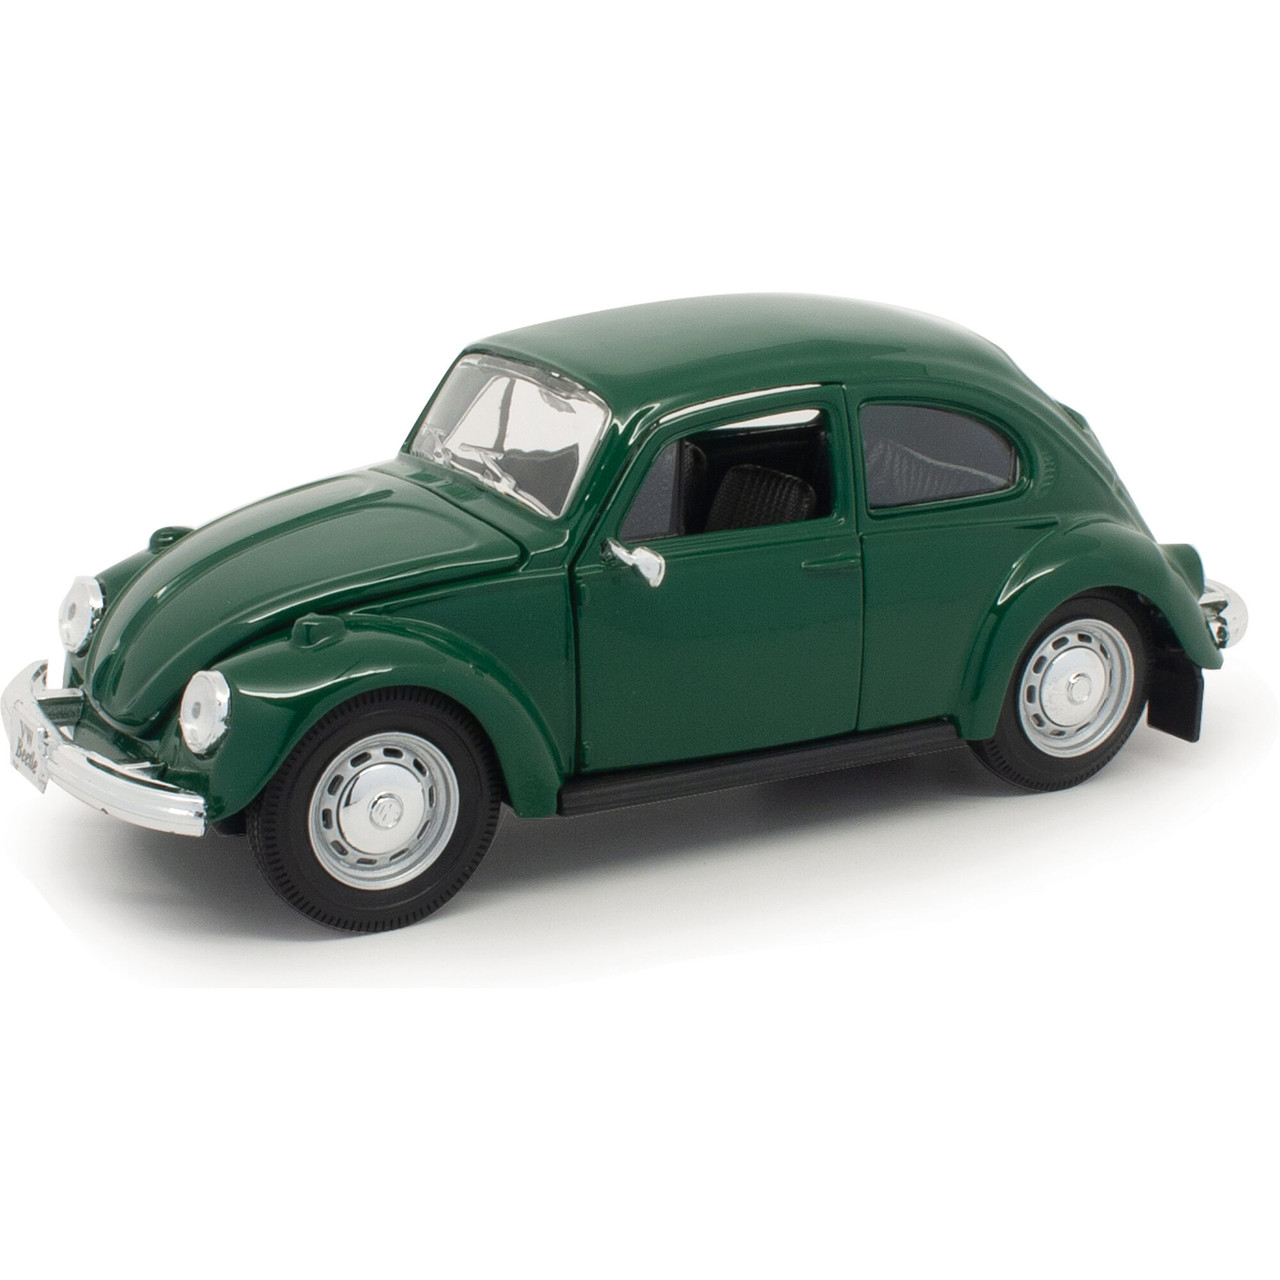 Soldaat Vochtigheid Nutteloos Volkswagen Beetle 1:24 Scale Diecast Model by Maisto | Fairfield  Collectibles - The #1 Source For High Quality Diecast Scale Model Cars